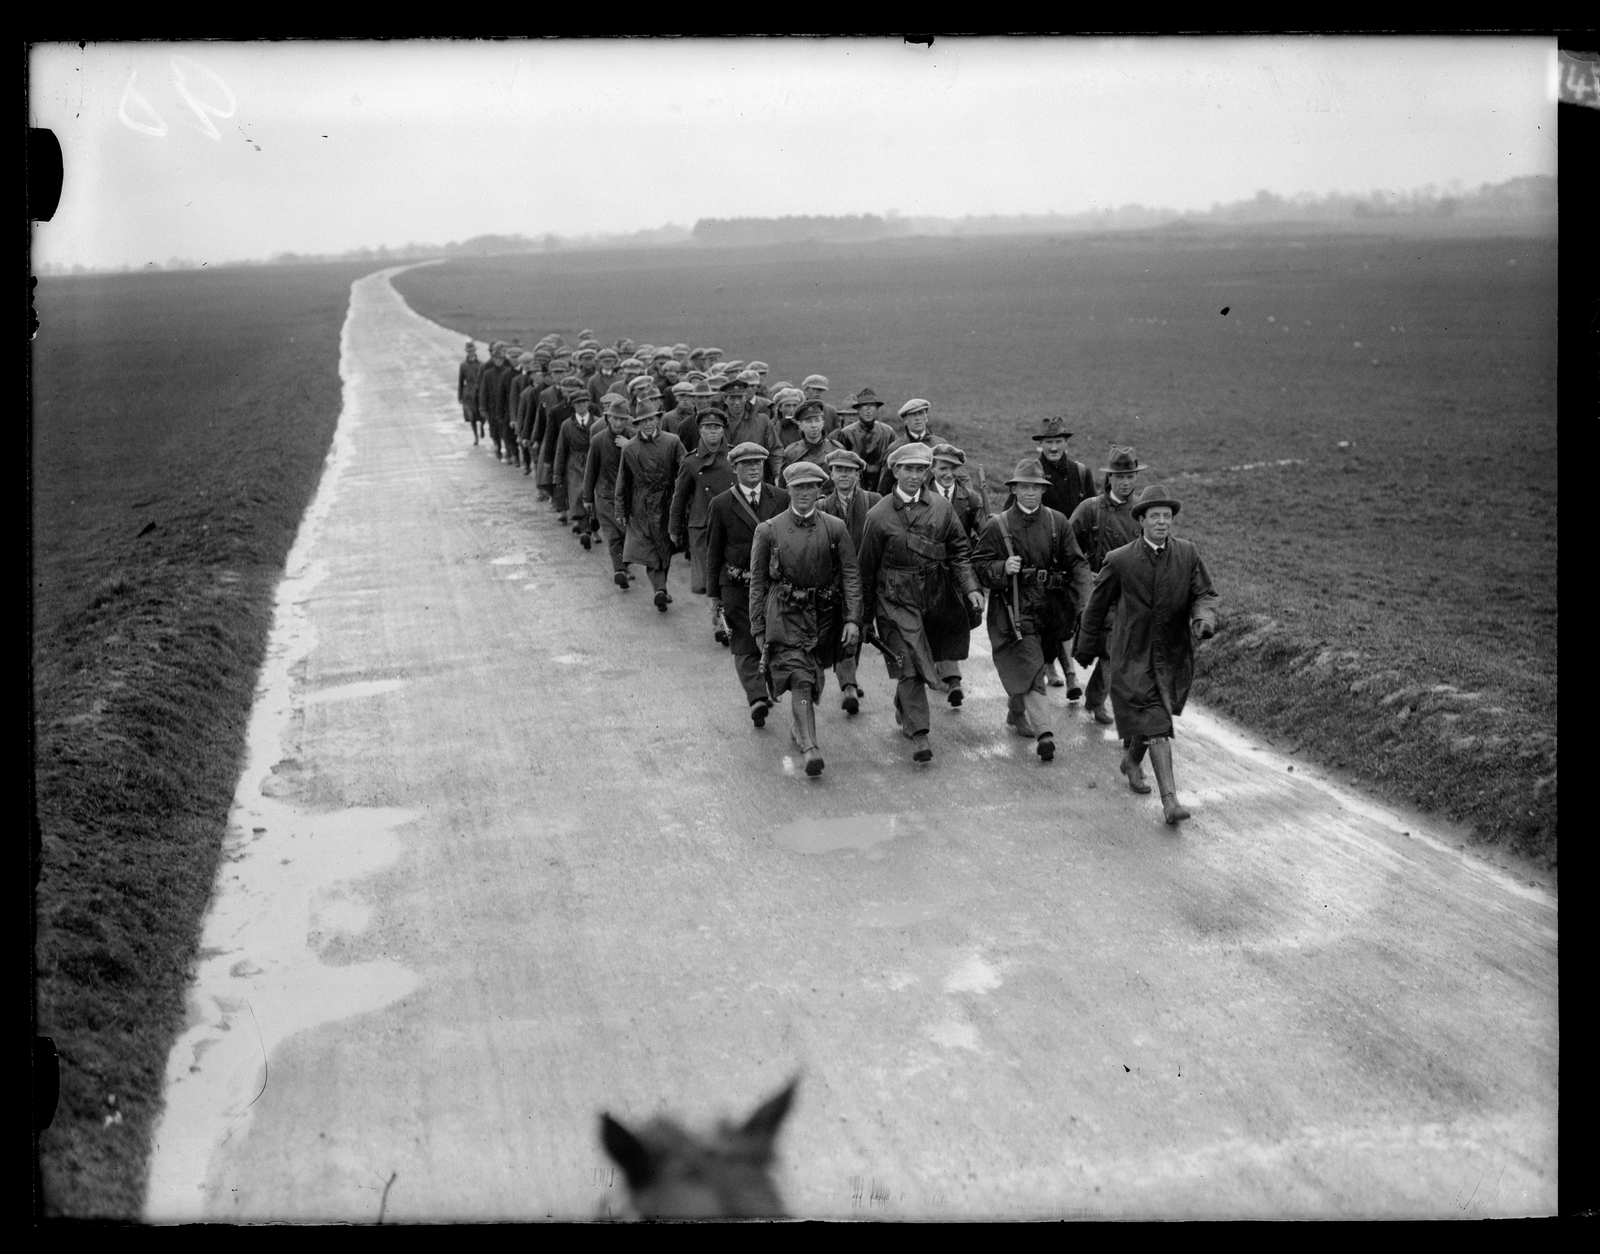 Image - New recruits for the Free State Army arrive at the Curragh, spring, 1922. It was far from ready for a showdown with the anti-Treaty IRA (Credit: RTÉ Photographic Archive, the Cashman Collection)